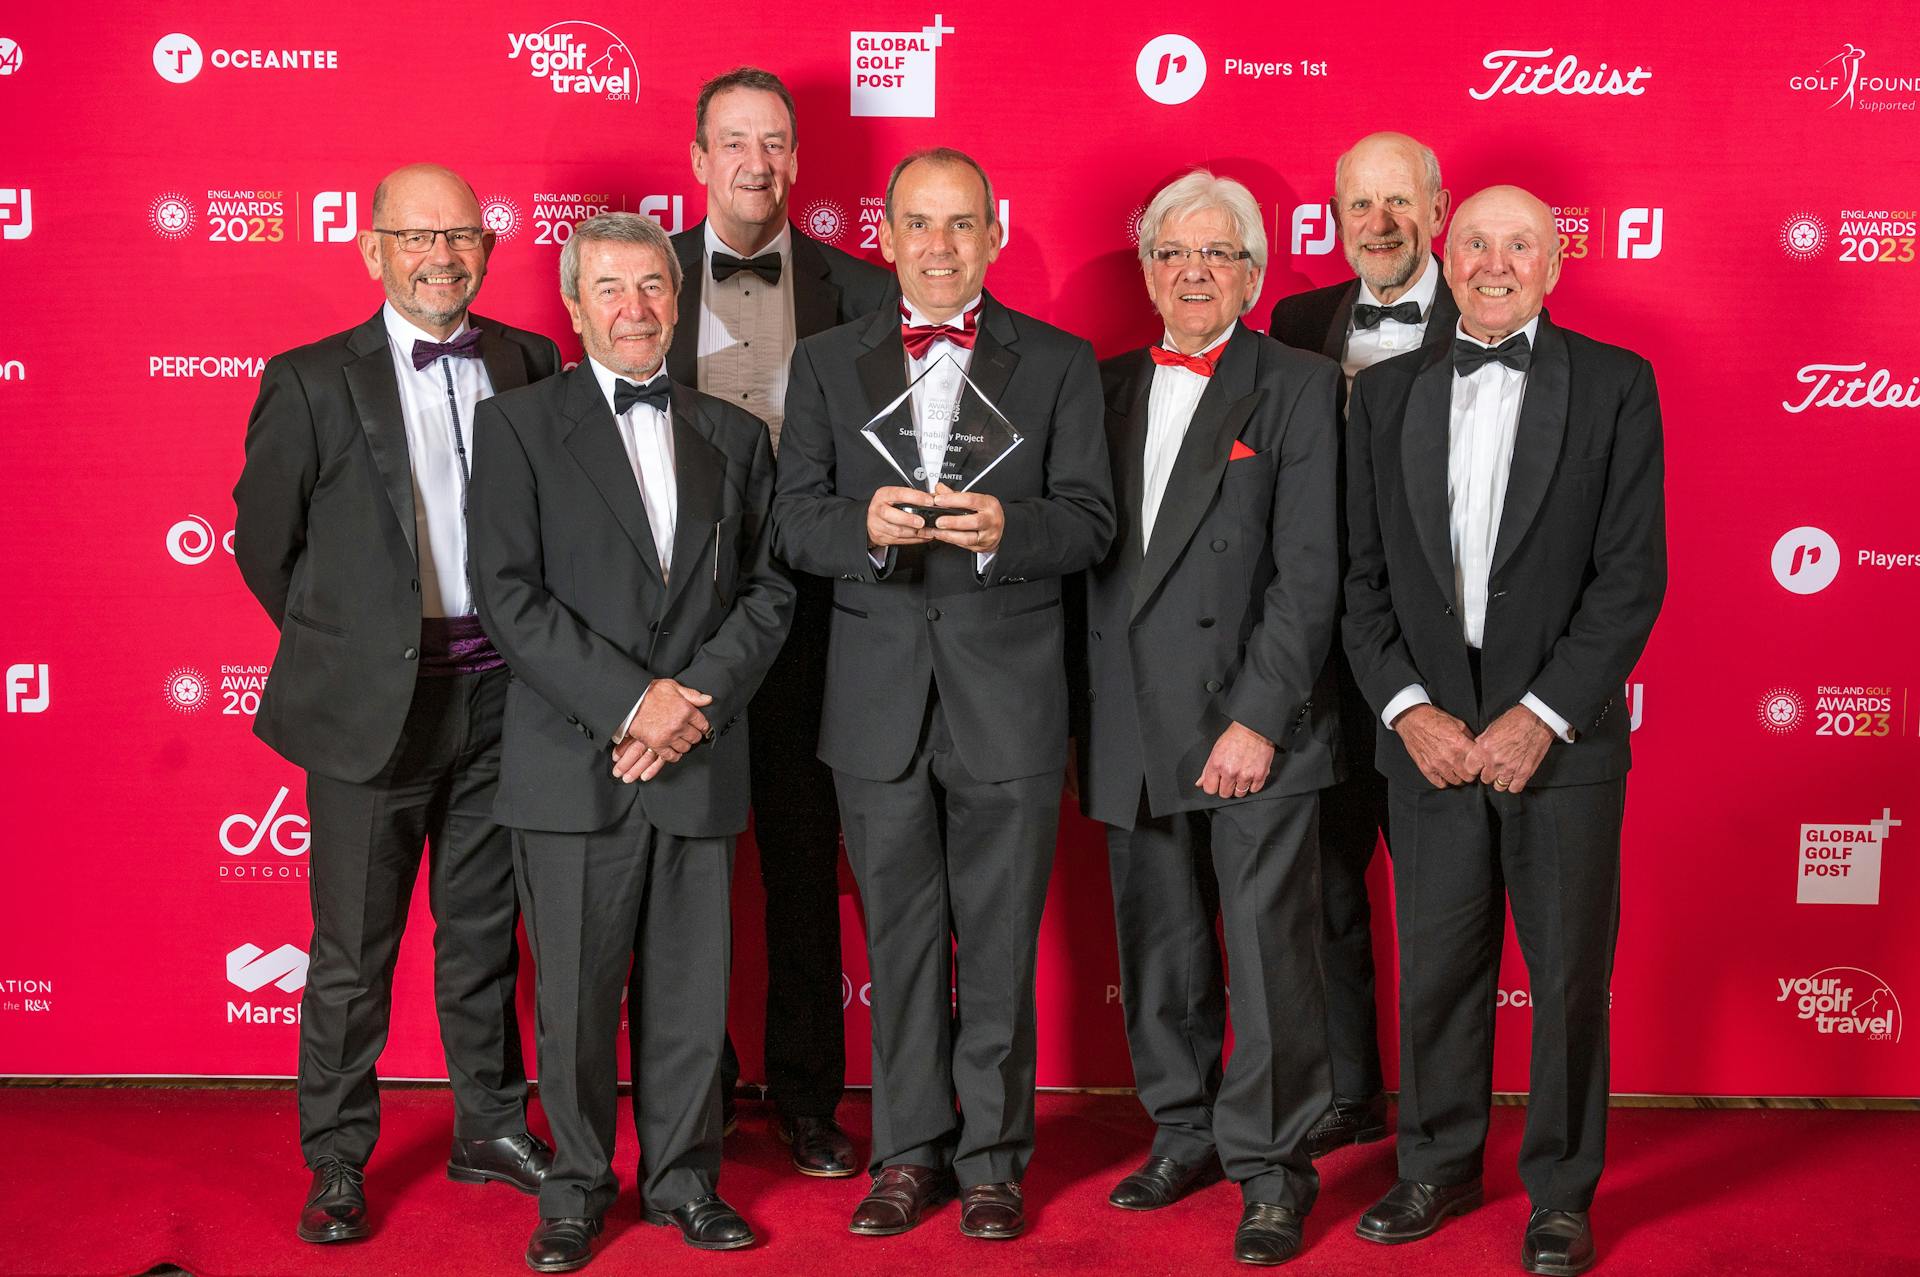 Bigbury Golf Club won the award for the Sustainability Project of the Year at England Golf Awards 2023.